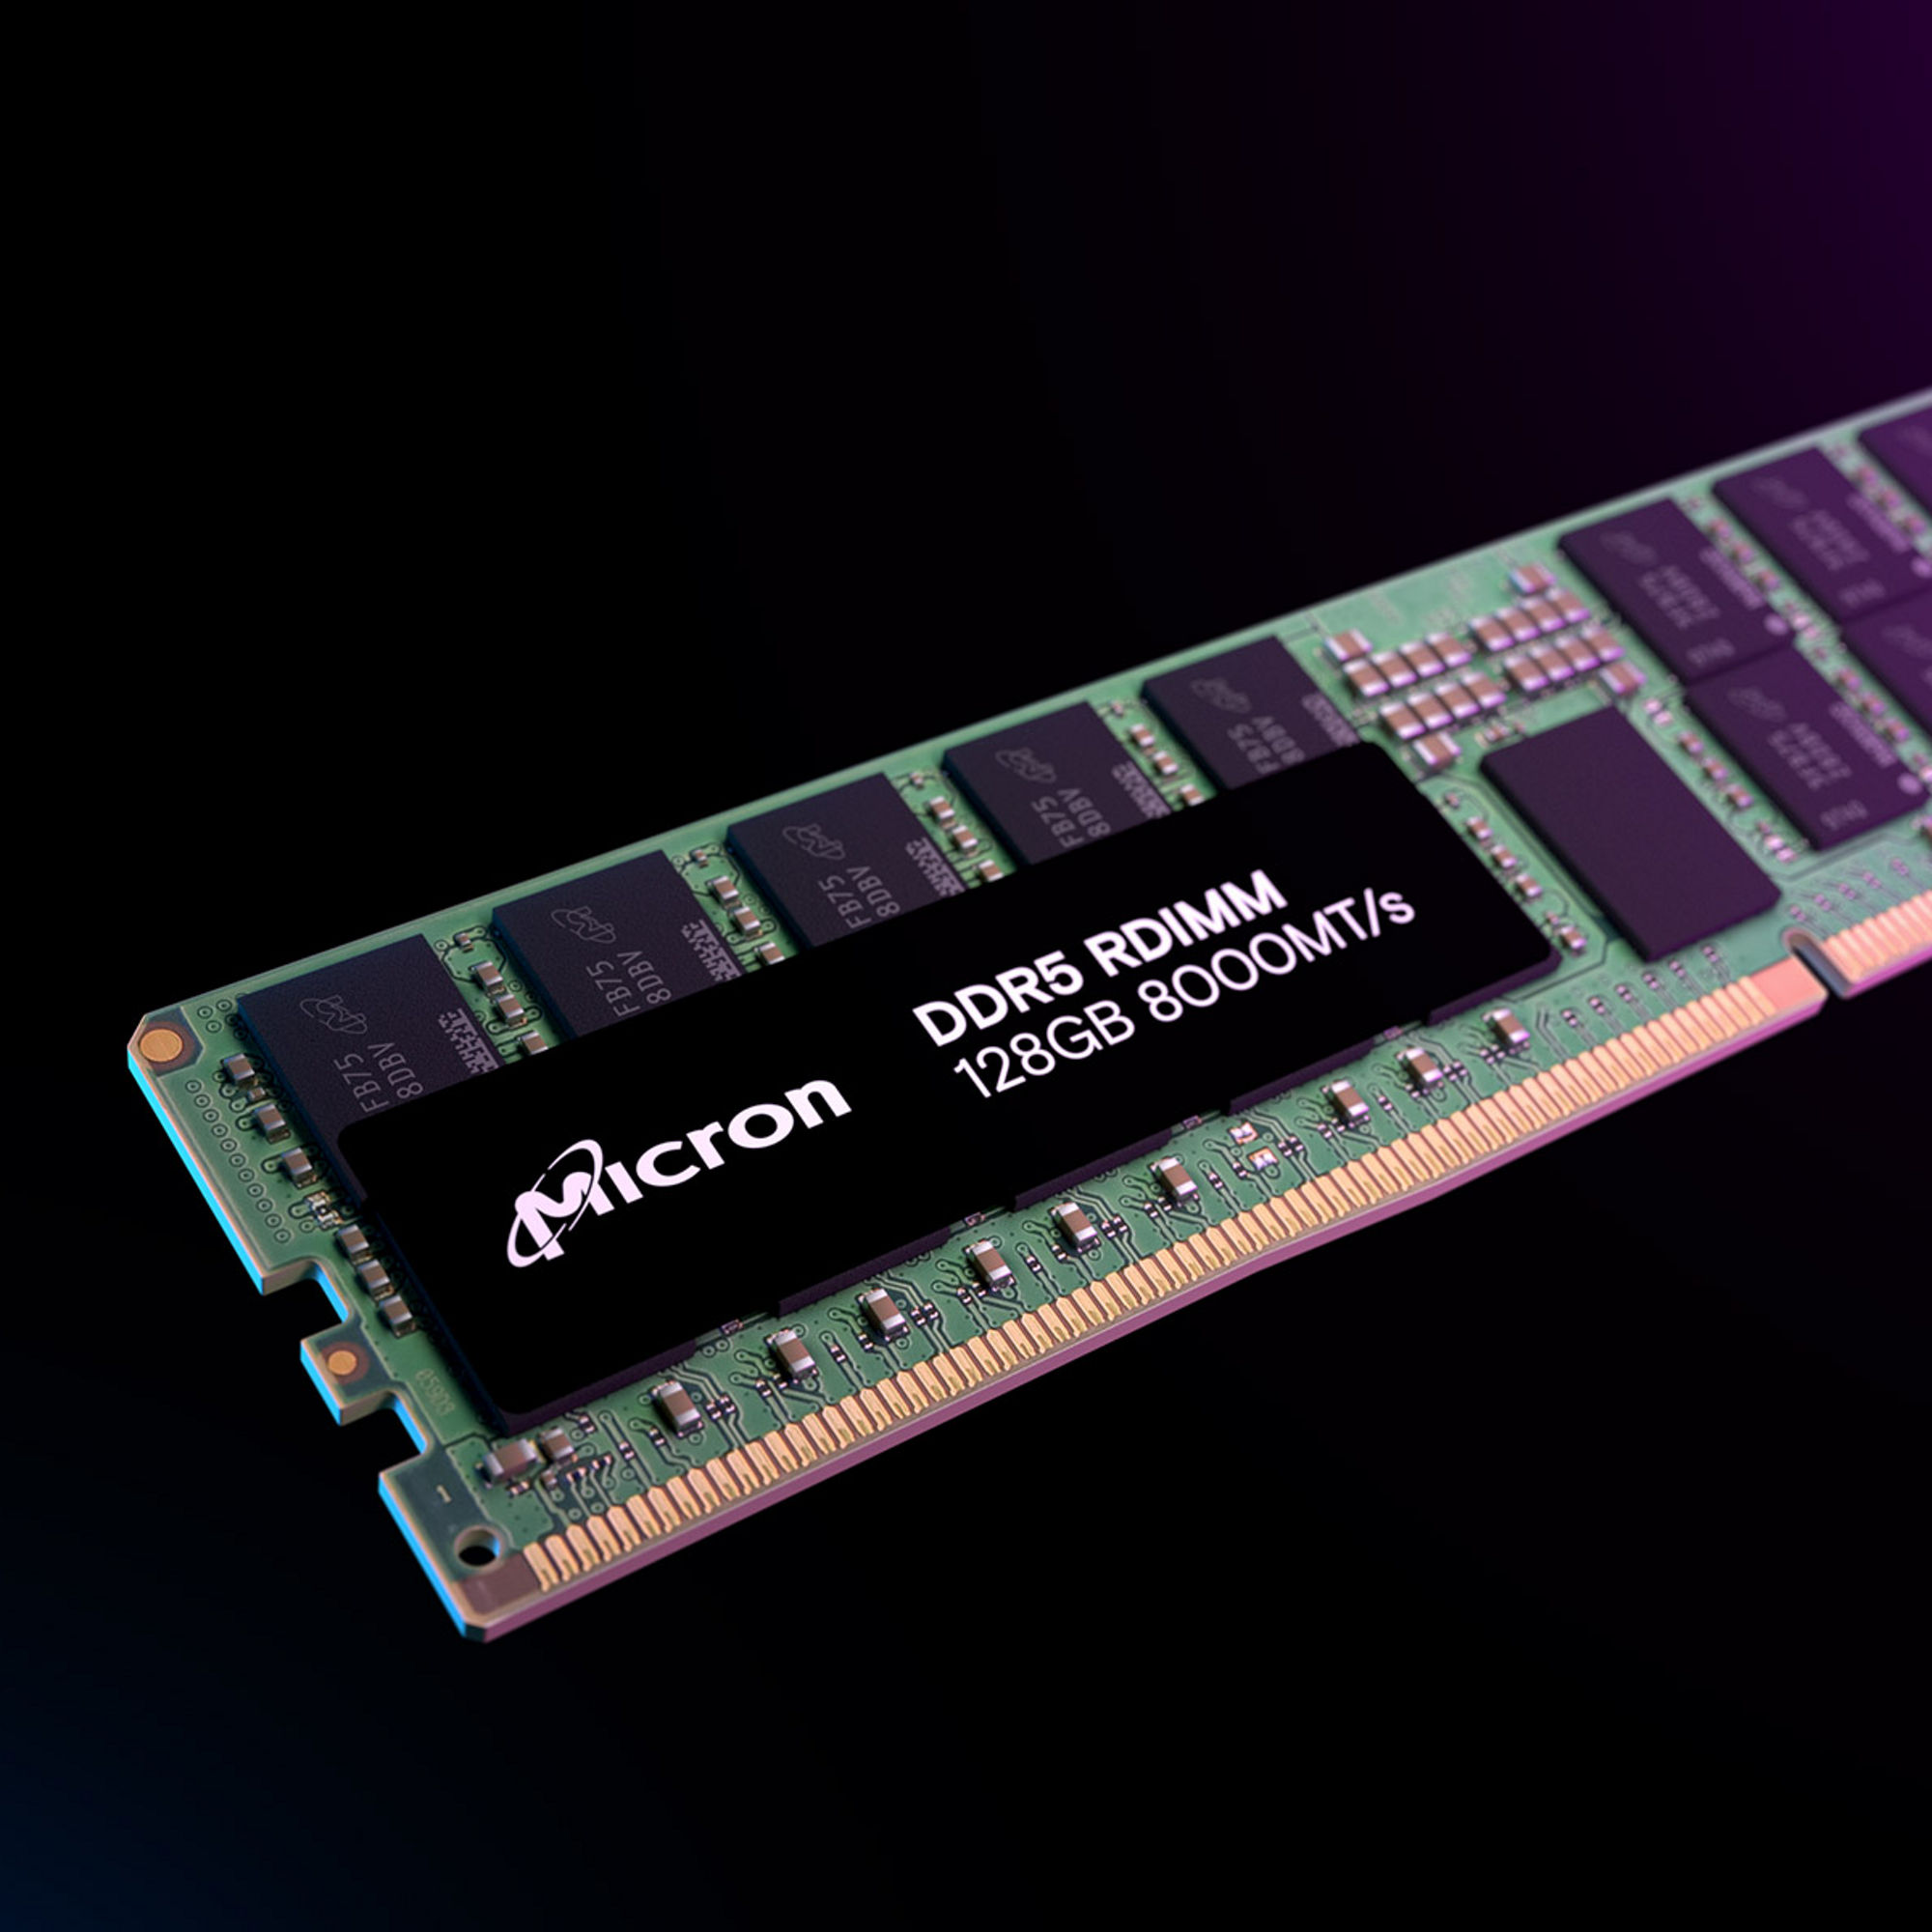 Micron DDR5 RDIMM with 128GB 8000MT/s with a gradient overlay blue to purple